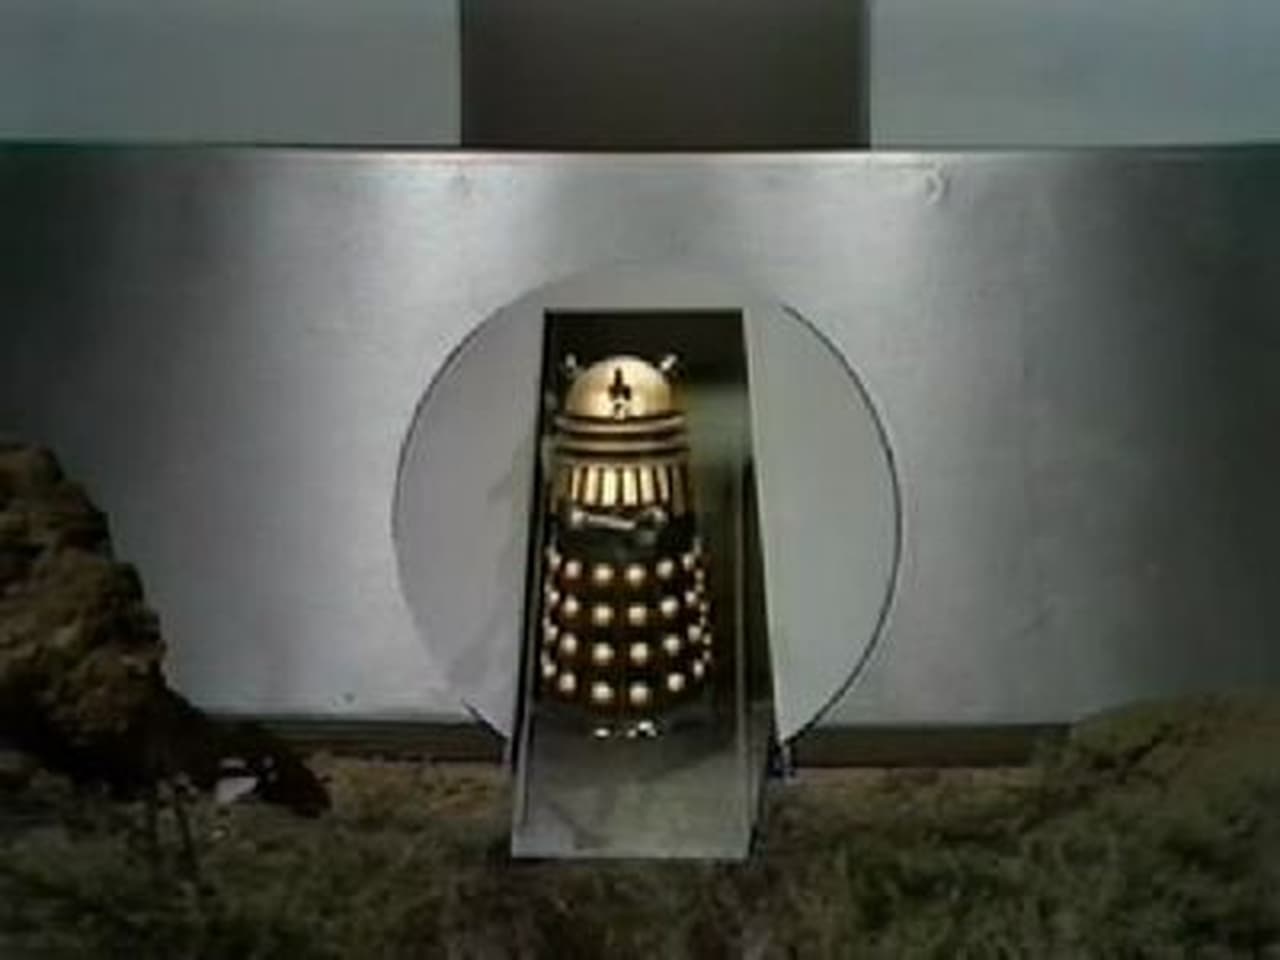 Doctor Who - Season 10 Episode 20 : Planet of the Daleks (6)